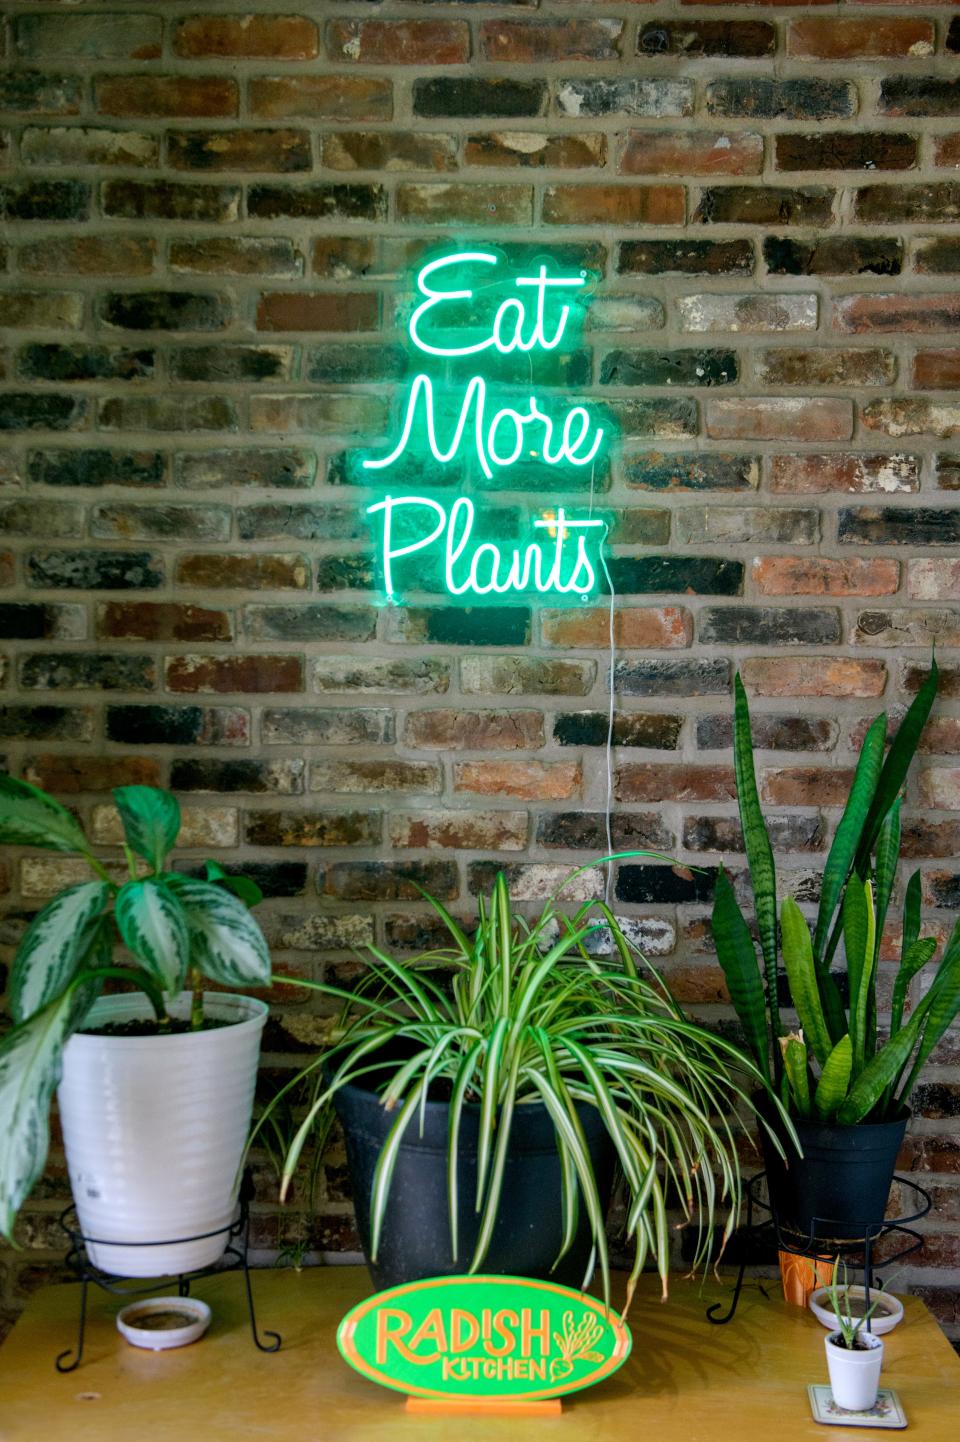 A neon sign declaring "Eat More Plants" decorates a wall at the entrance to Radish Kitchen in Campustown.